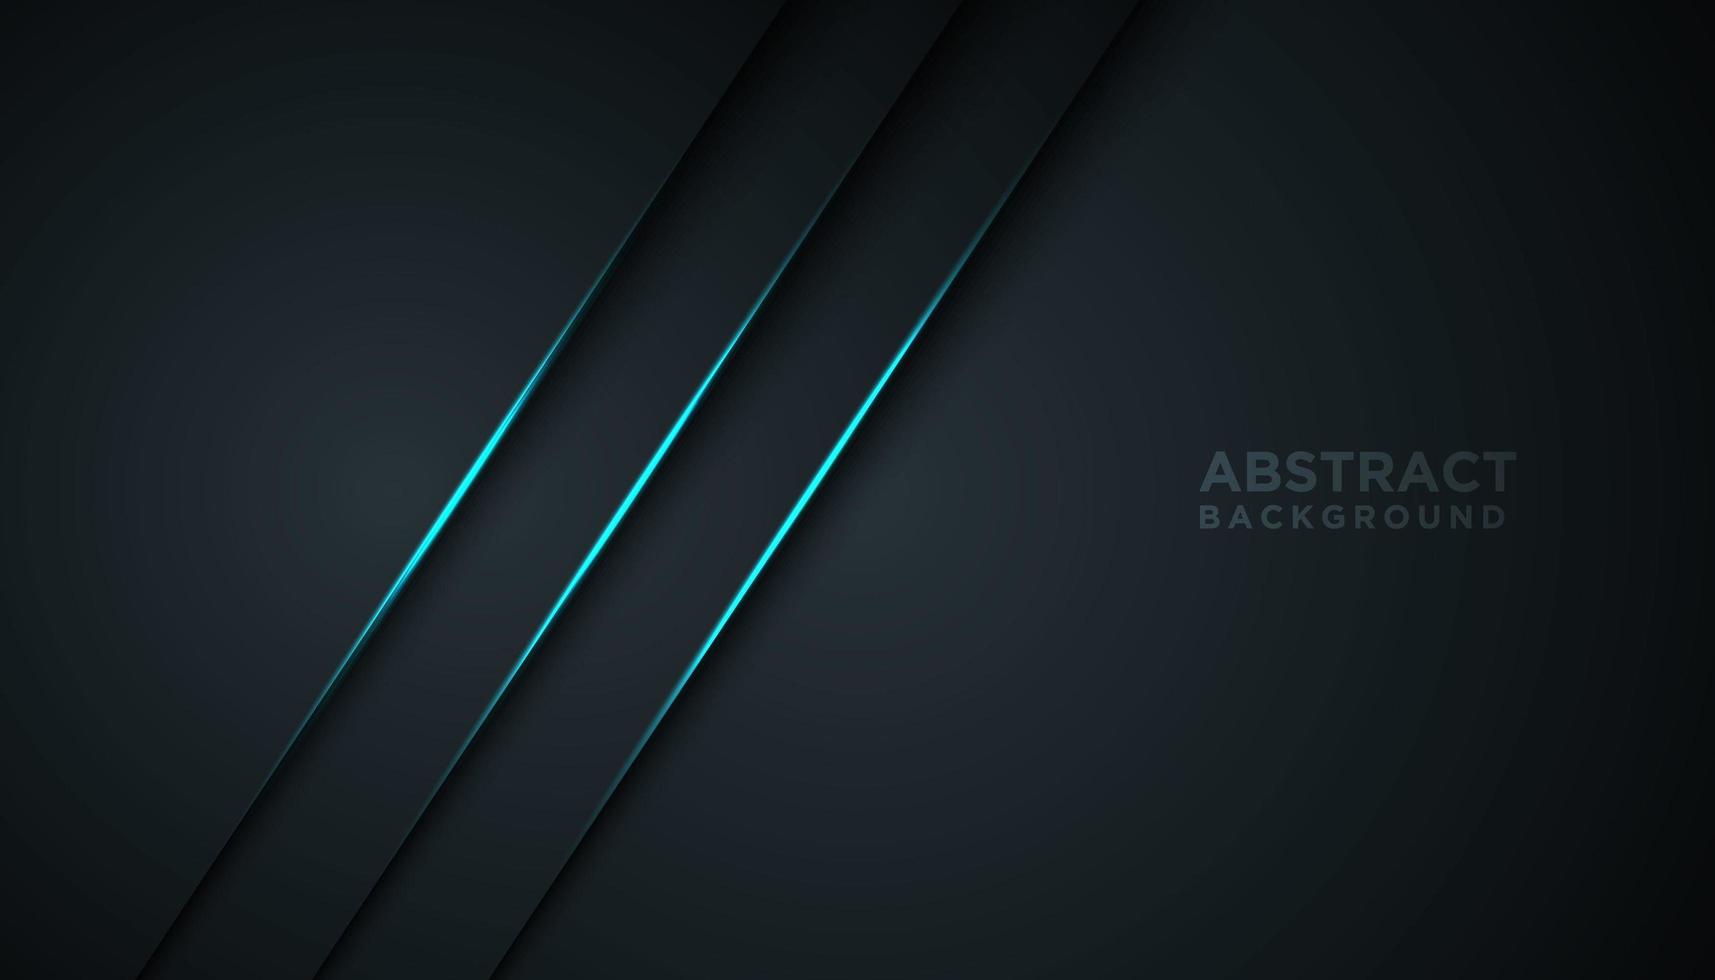 Abstract Black with Blue Shining Diagonal Lines Background vector